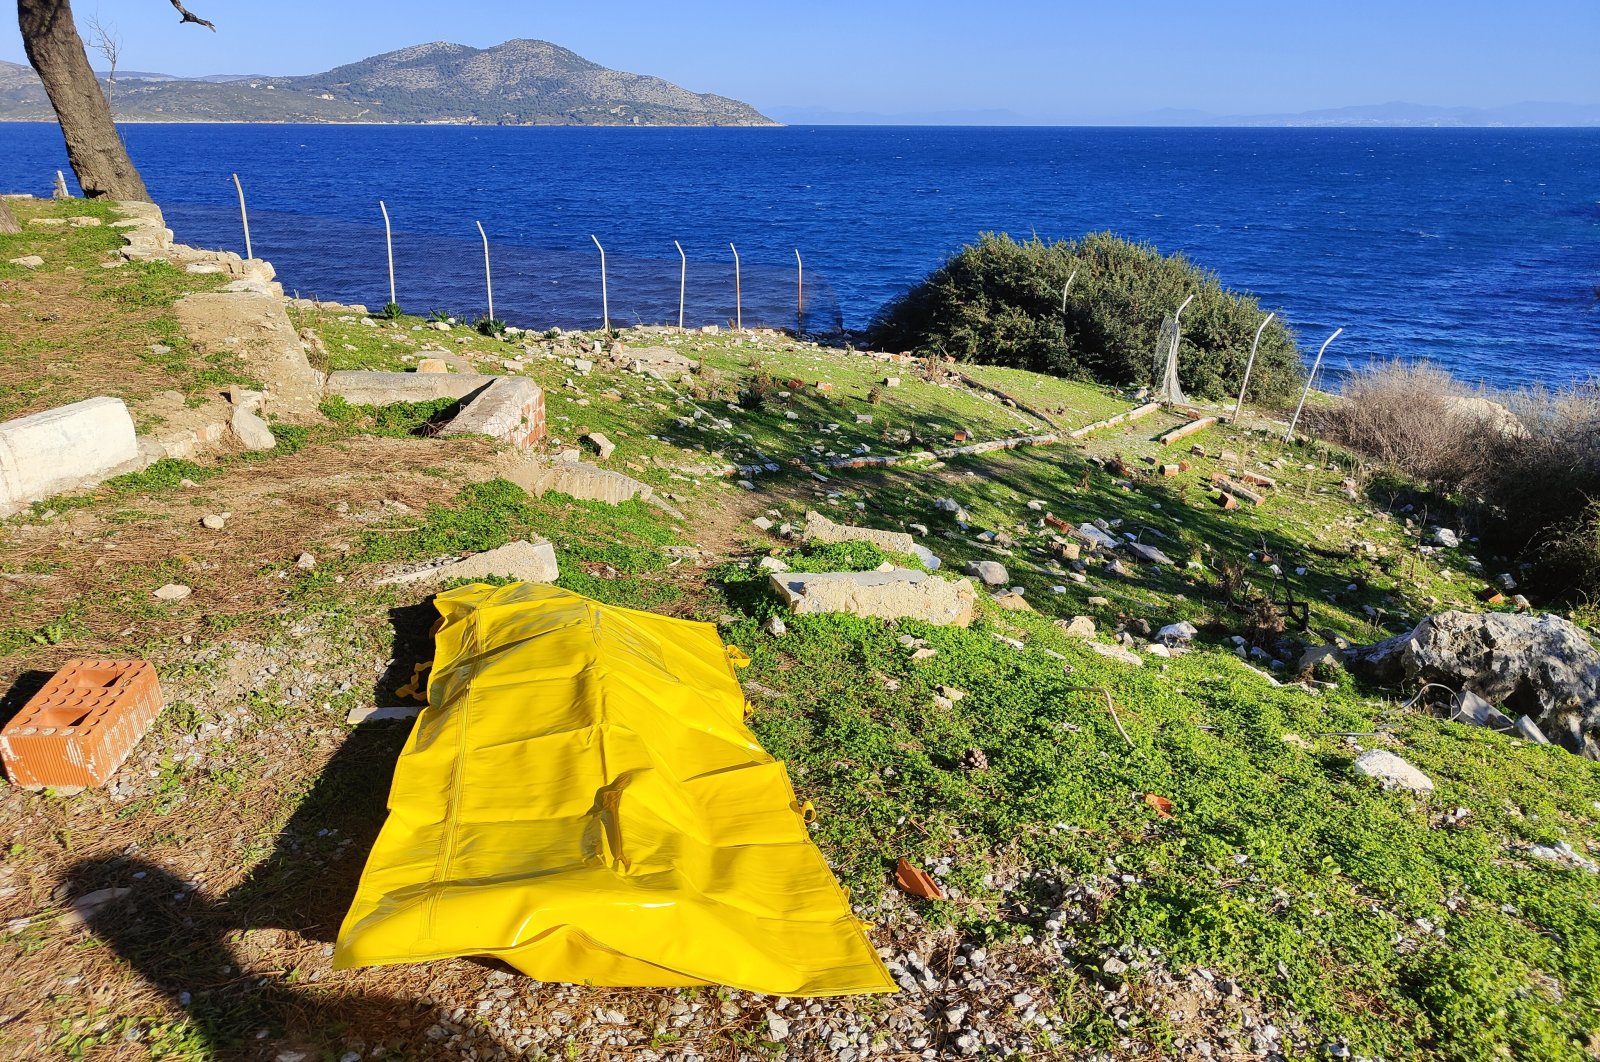 The body of one of two migrant women who drowned in the Aegean Sea after being pushed back by the Greek coast guard is taken to shore by Turkish authorities on Dec. 21, 2022. (IHA Photo)